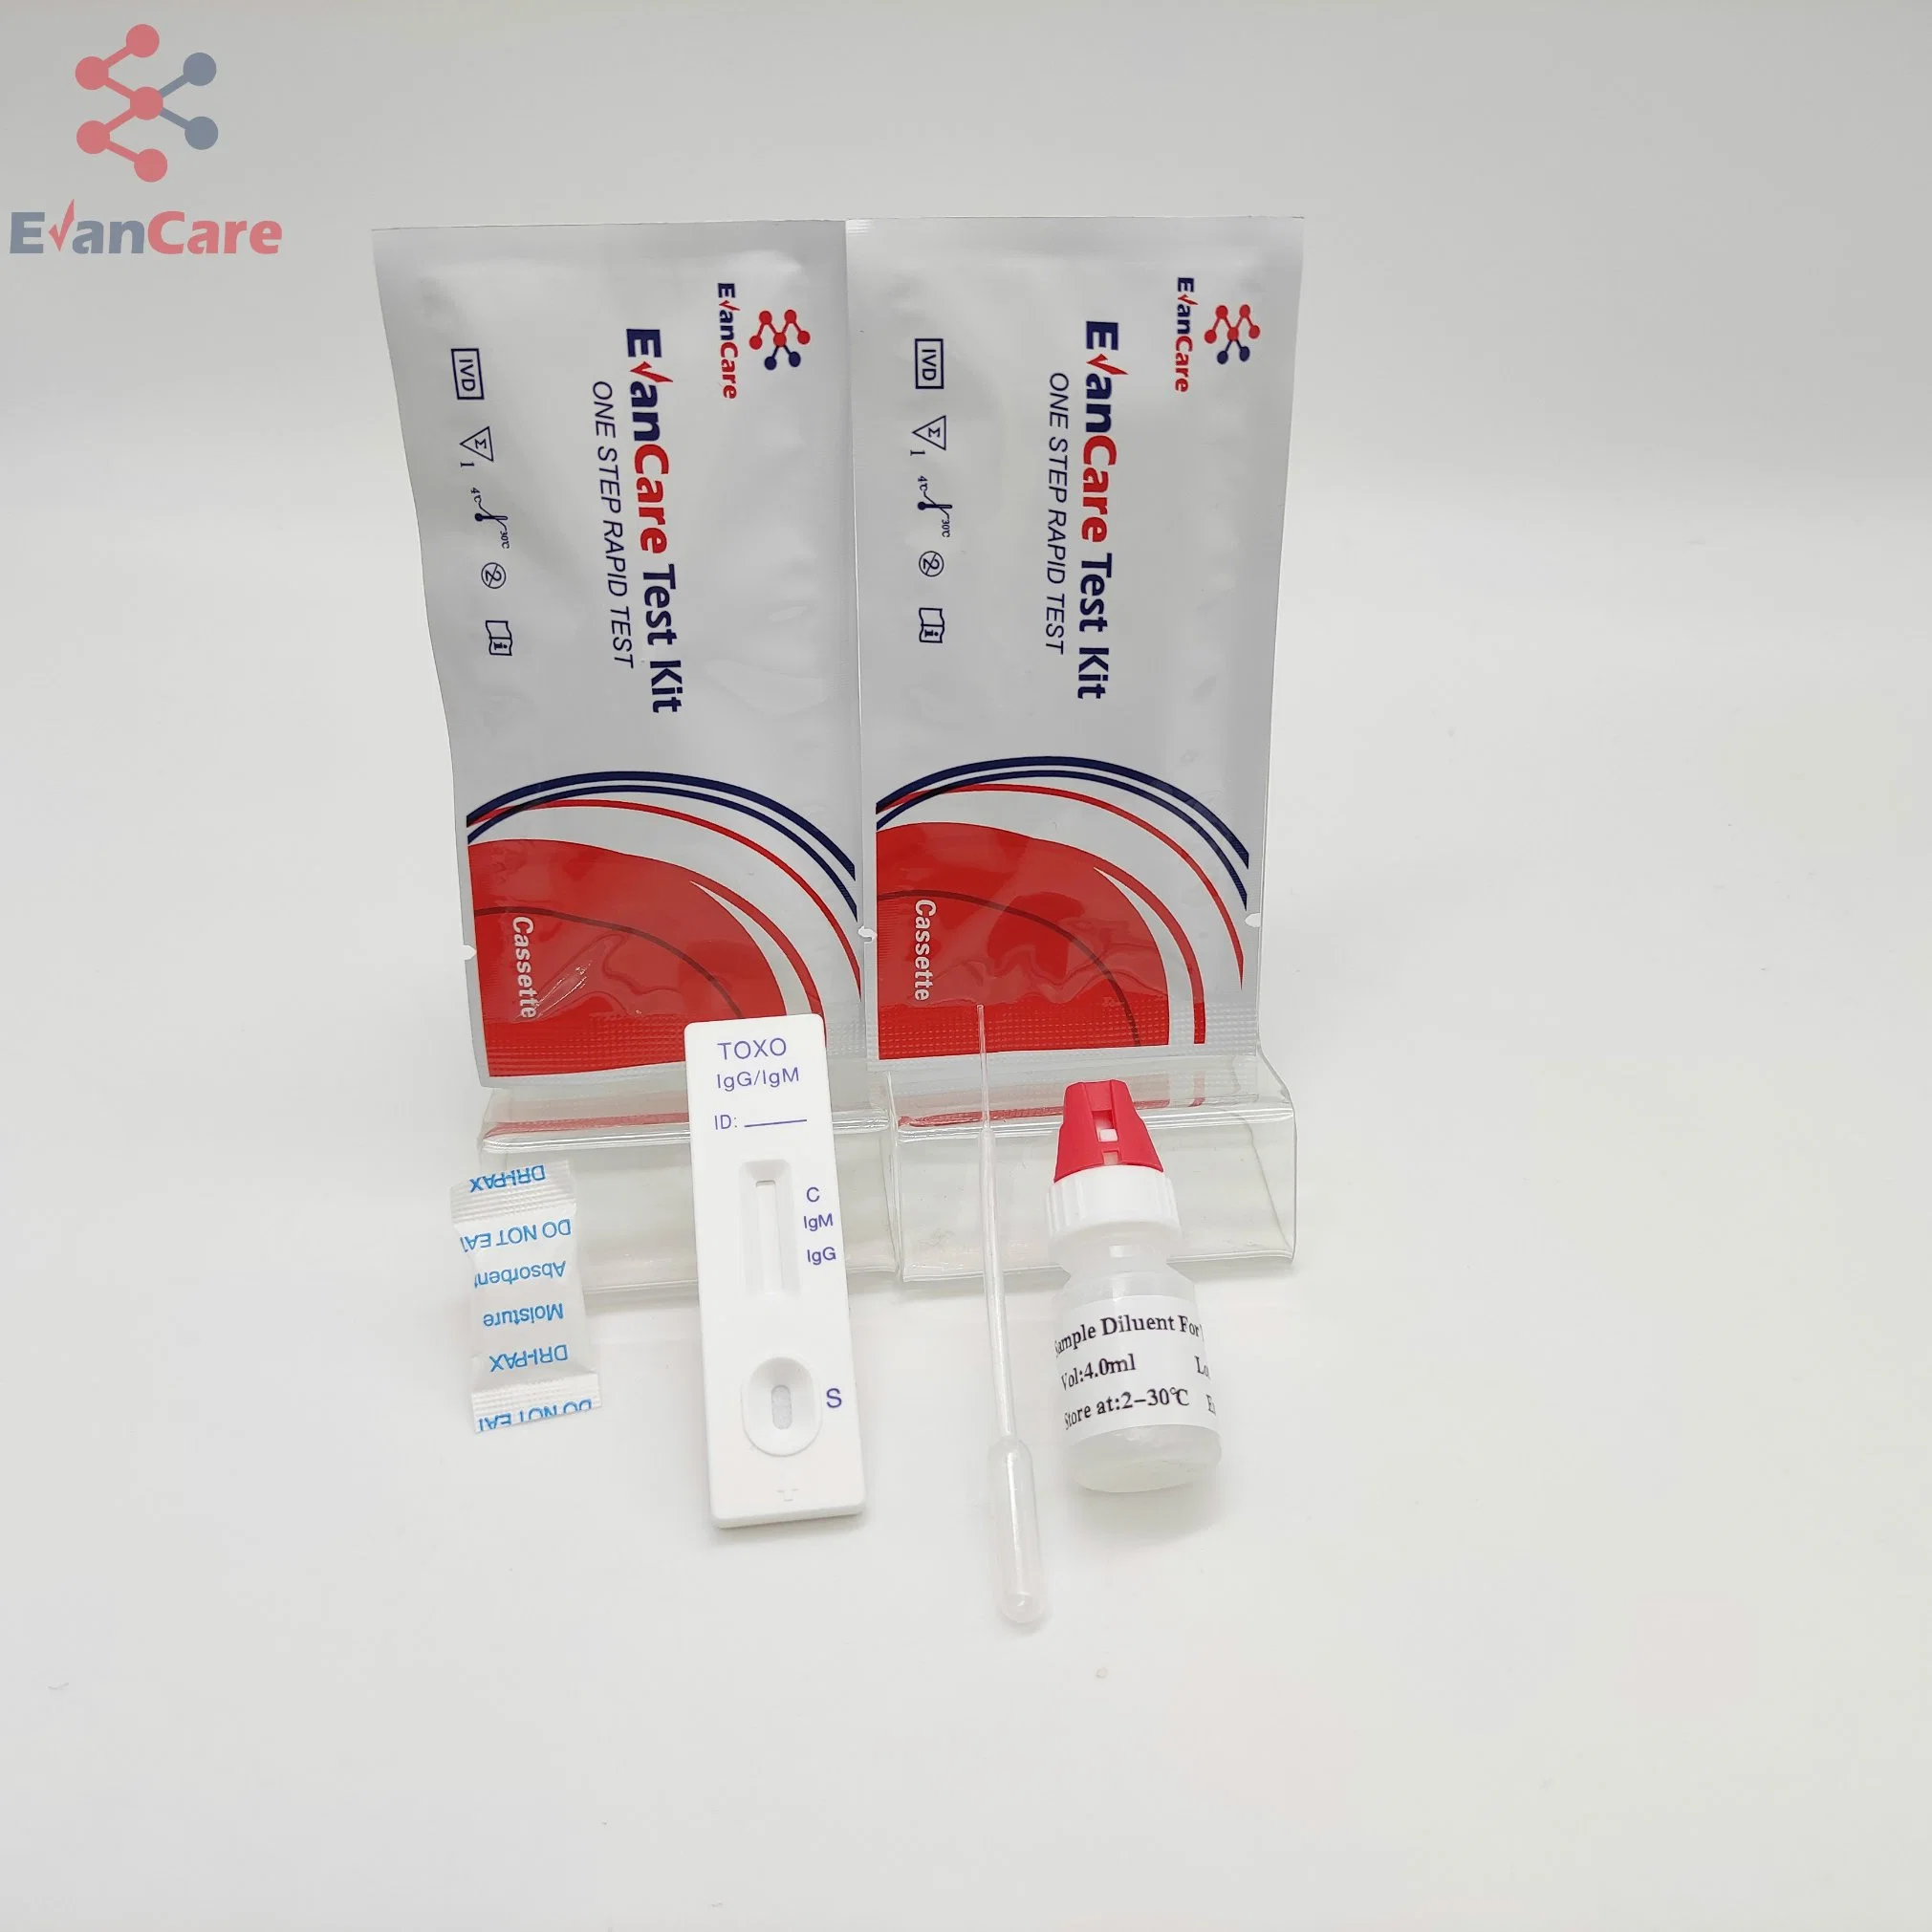 Accurate Toxoplasma Test Cassette / Medical Diagnostic Toxo Rapid Test / Lateral Flow Rapid Test Cassette